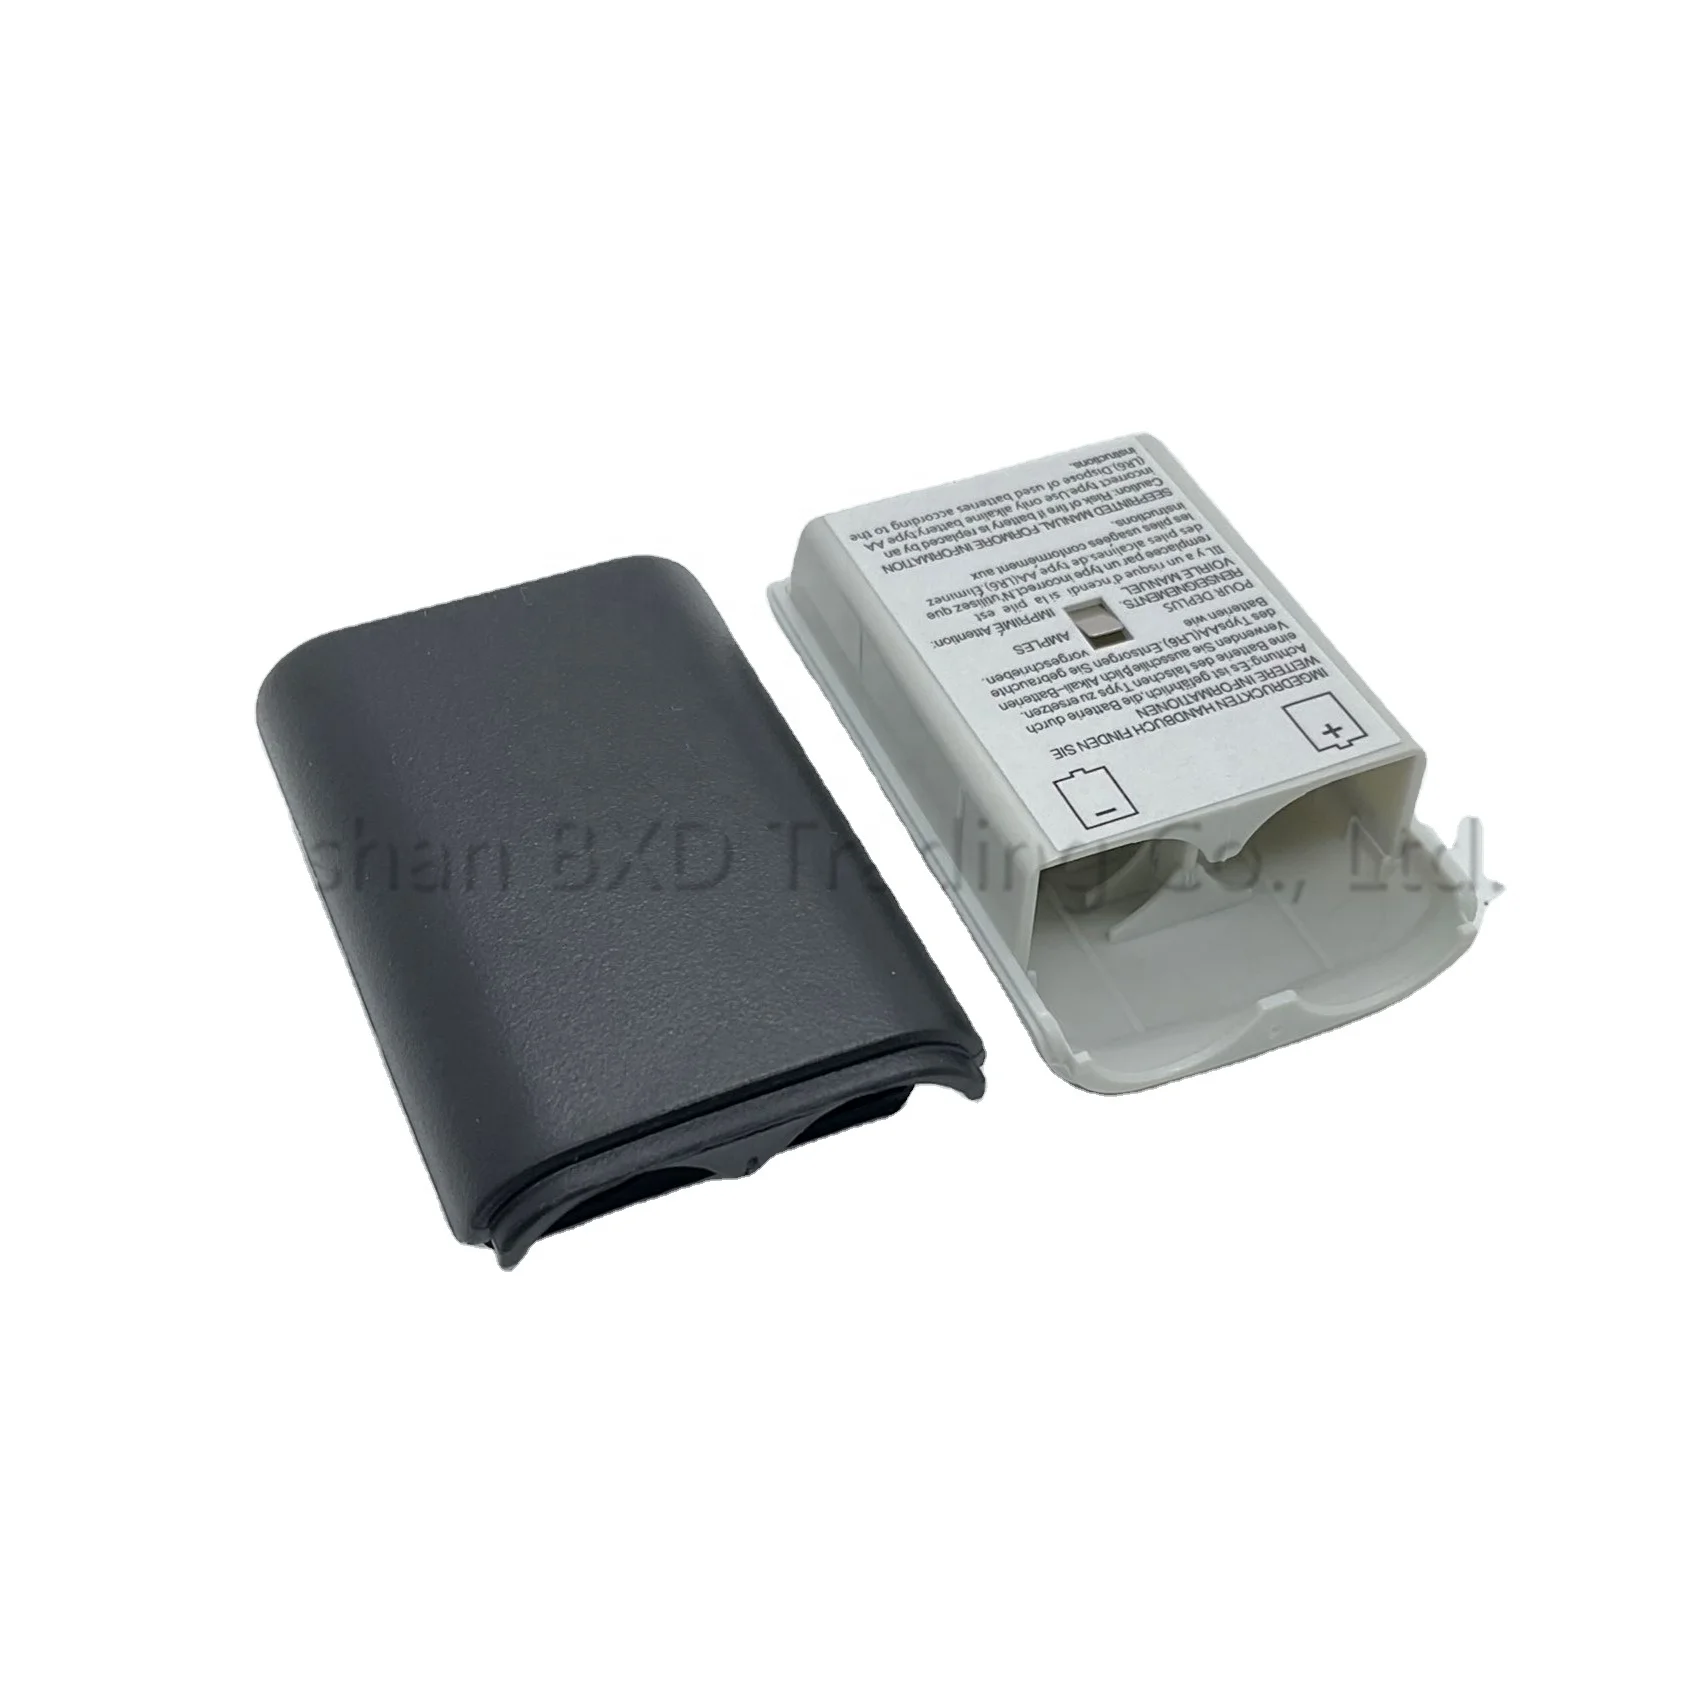 indhold tage medicin bit For Xbox360 Battery Cover For Xbox 360 Battery Pack Cover For Xbox 360  Controller - Buy For Xbox360 Battery Cover,Battery Cover For Xbox 360,Battery  Pack Cover For Xbox 360 Controller Product on Alibaba.com